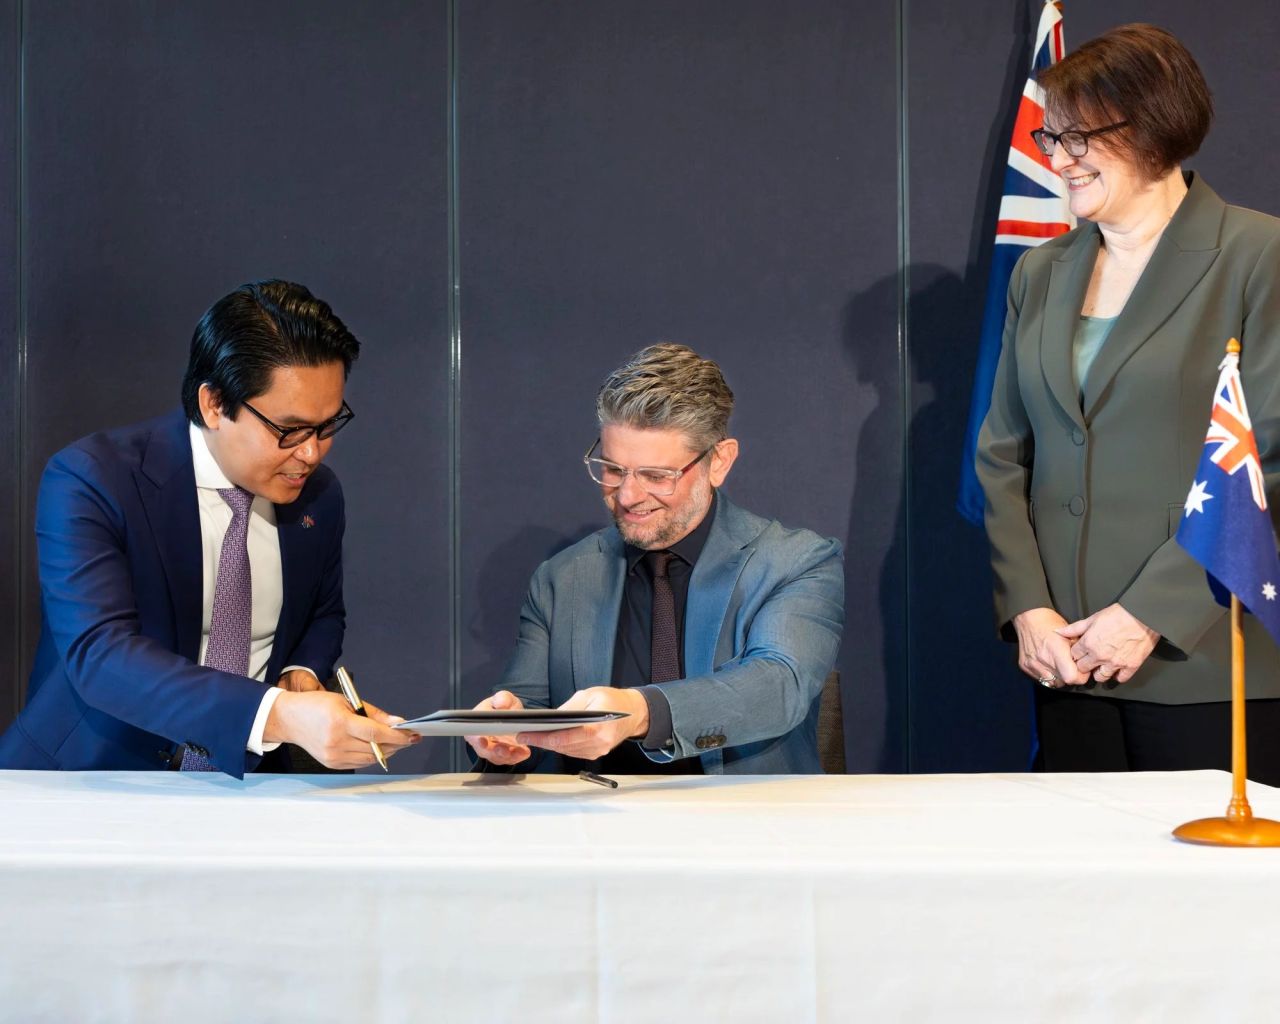 From left, Ambassador His Excellency Dr. Cheunboran Chanborey, Director Nick Mitzevich, and Susan Templeman MP pictured signing a loan agreement at the National Gallery of Australia in Canberra, Australia, 2023. Photo by: Karlee Holland.